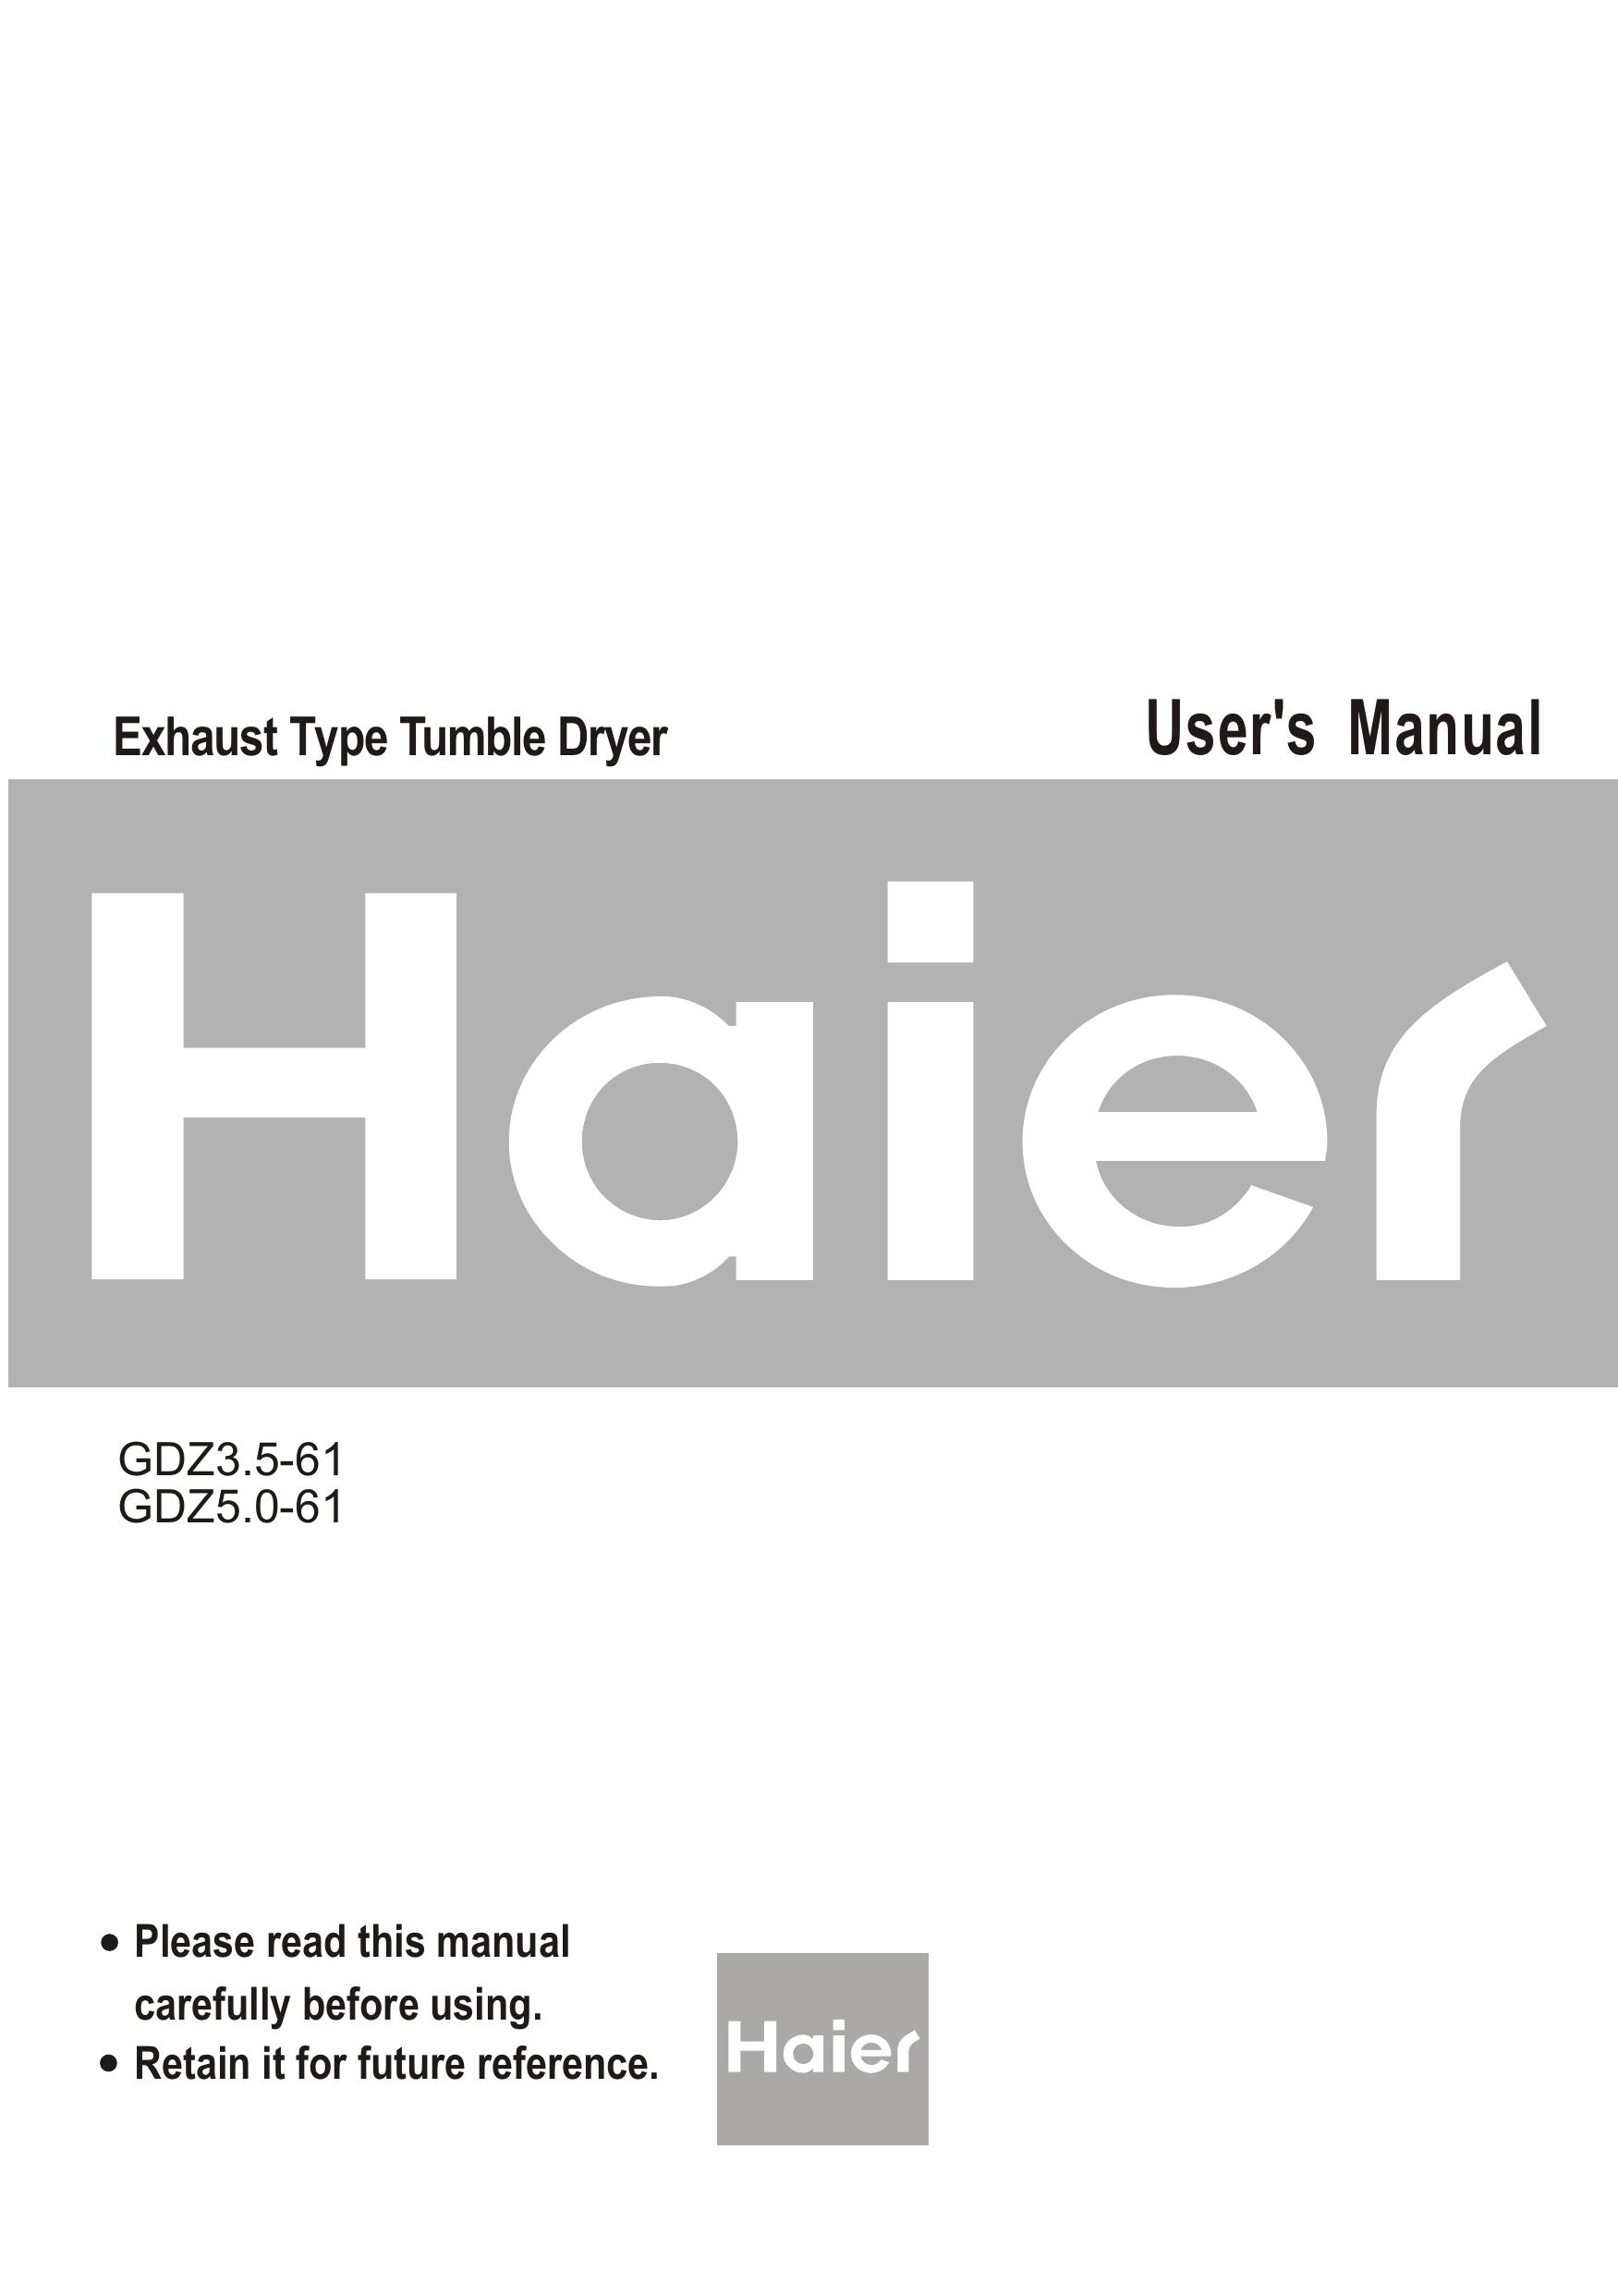 Haier GDZ5.0-61 Clothes Dryer User Manual